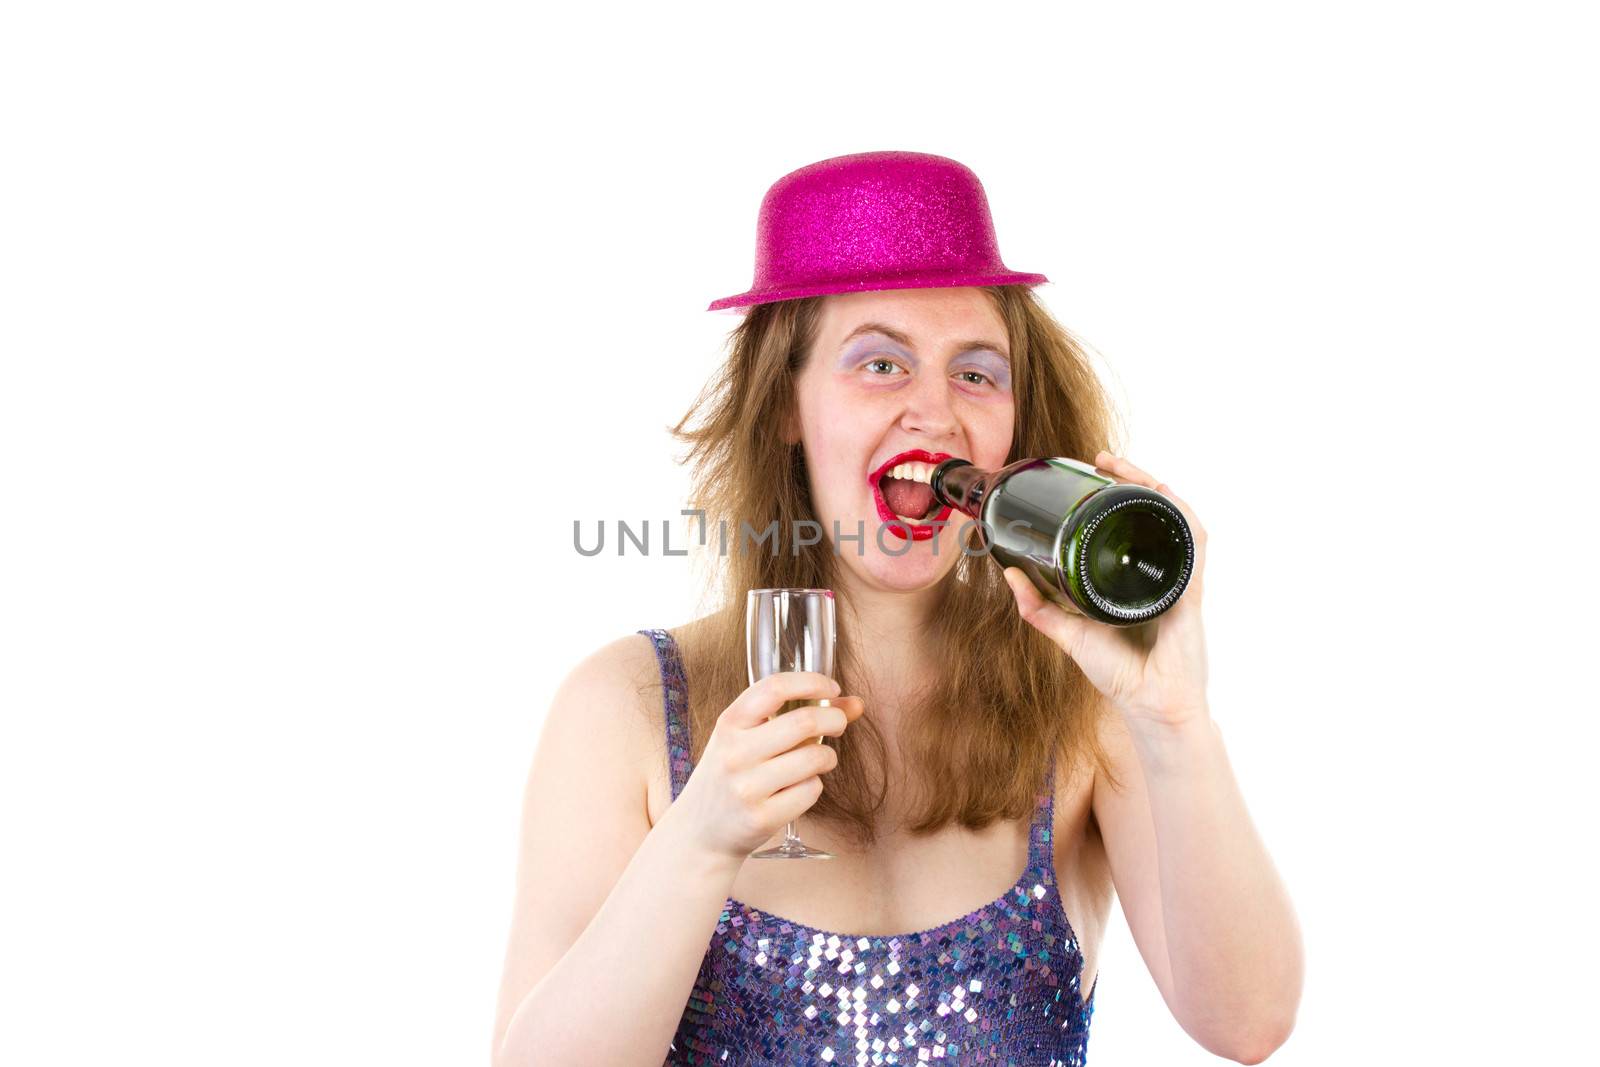 Beautiful partygirl drinking too much alcohol